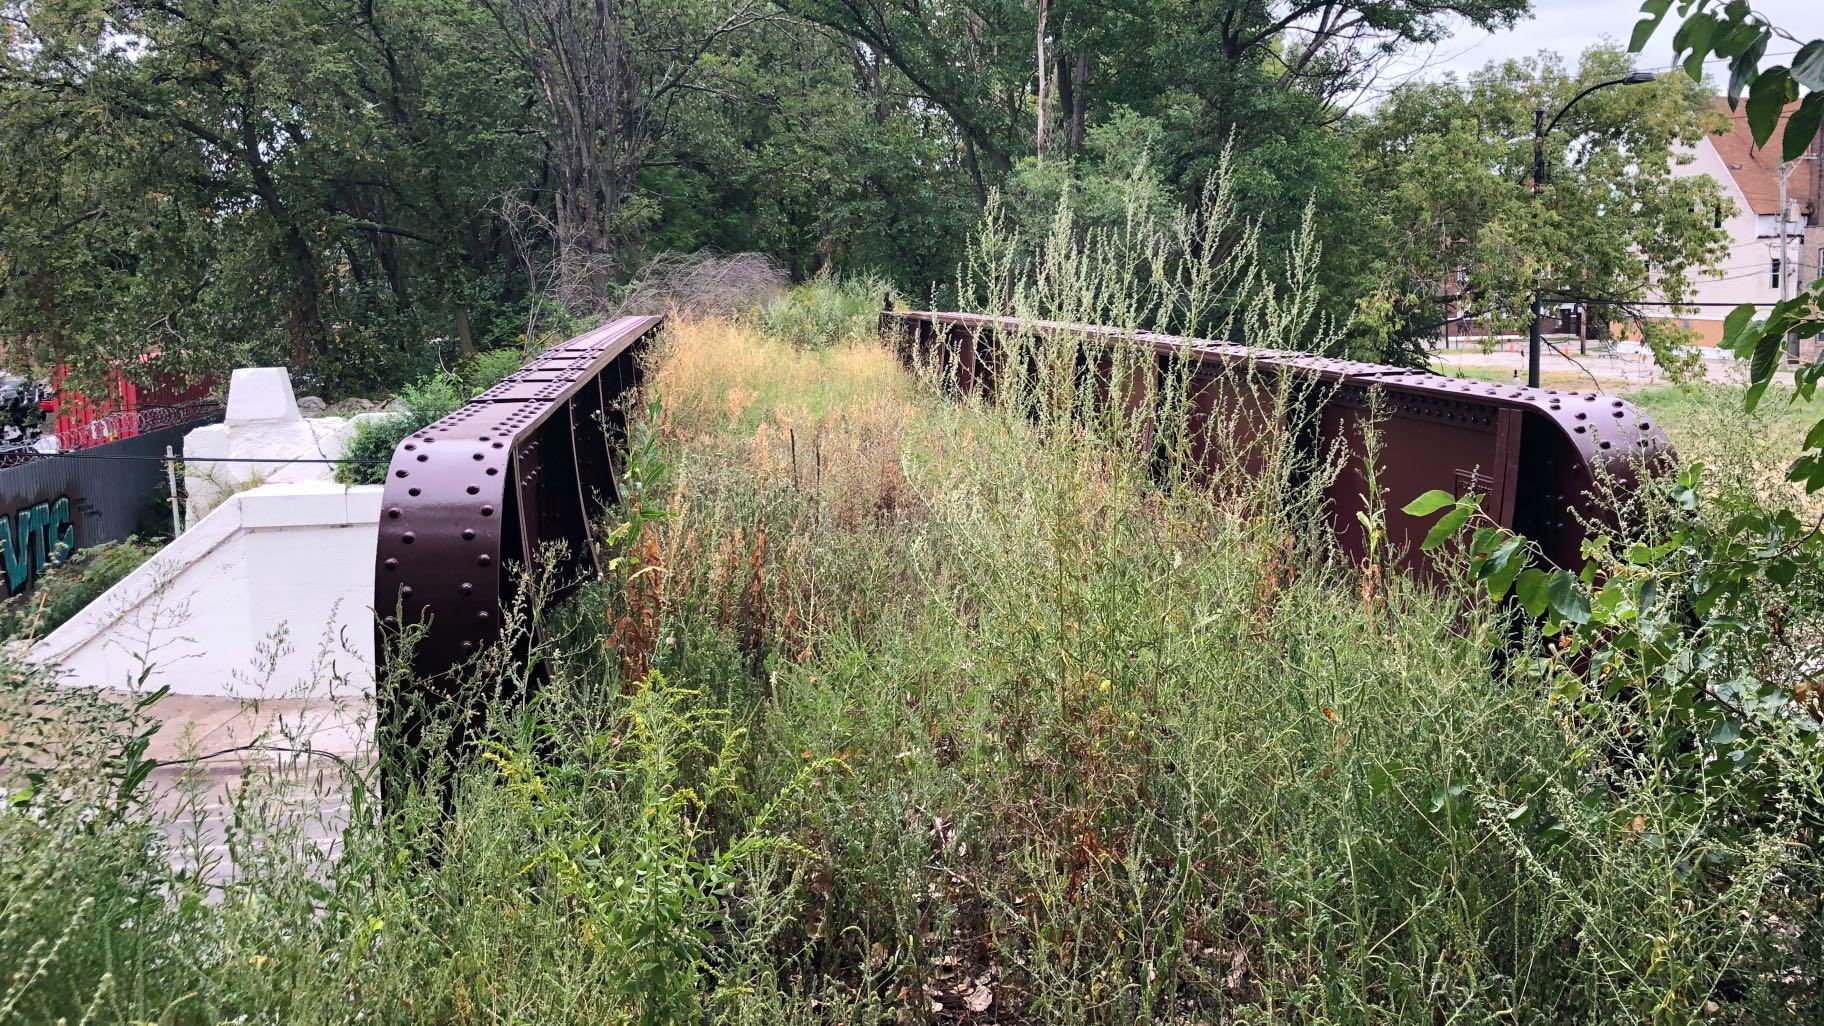 Cities can contribute to 30 by 30 by seizing opportunities to enhance habitat in existing open spaces. The proposed conversion of an abandoned rail line into a nature trail in Englewood is one such example. (Patty Wetli / WTTW News)